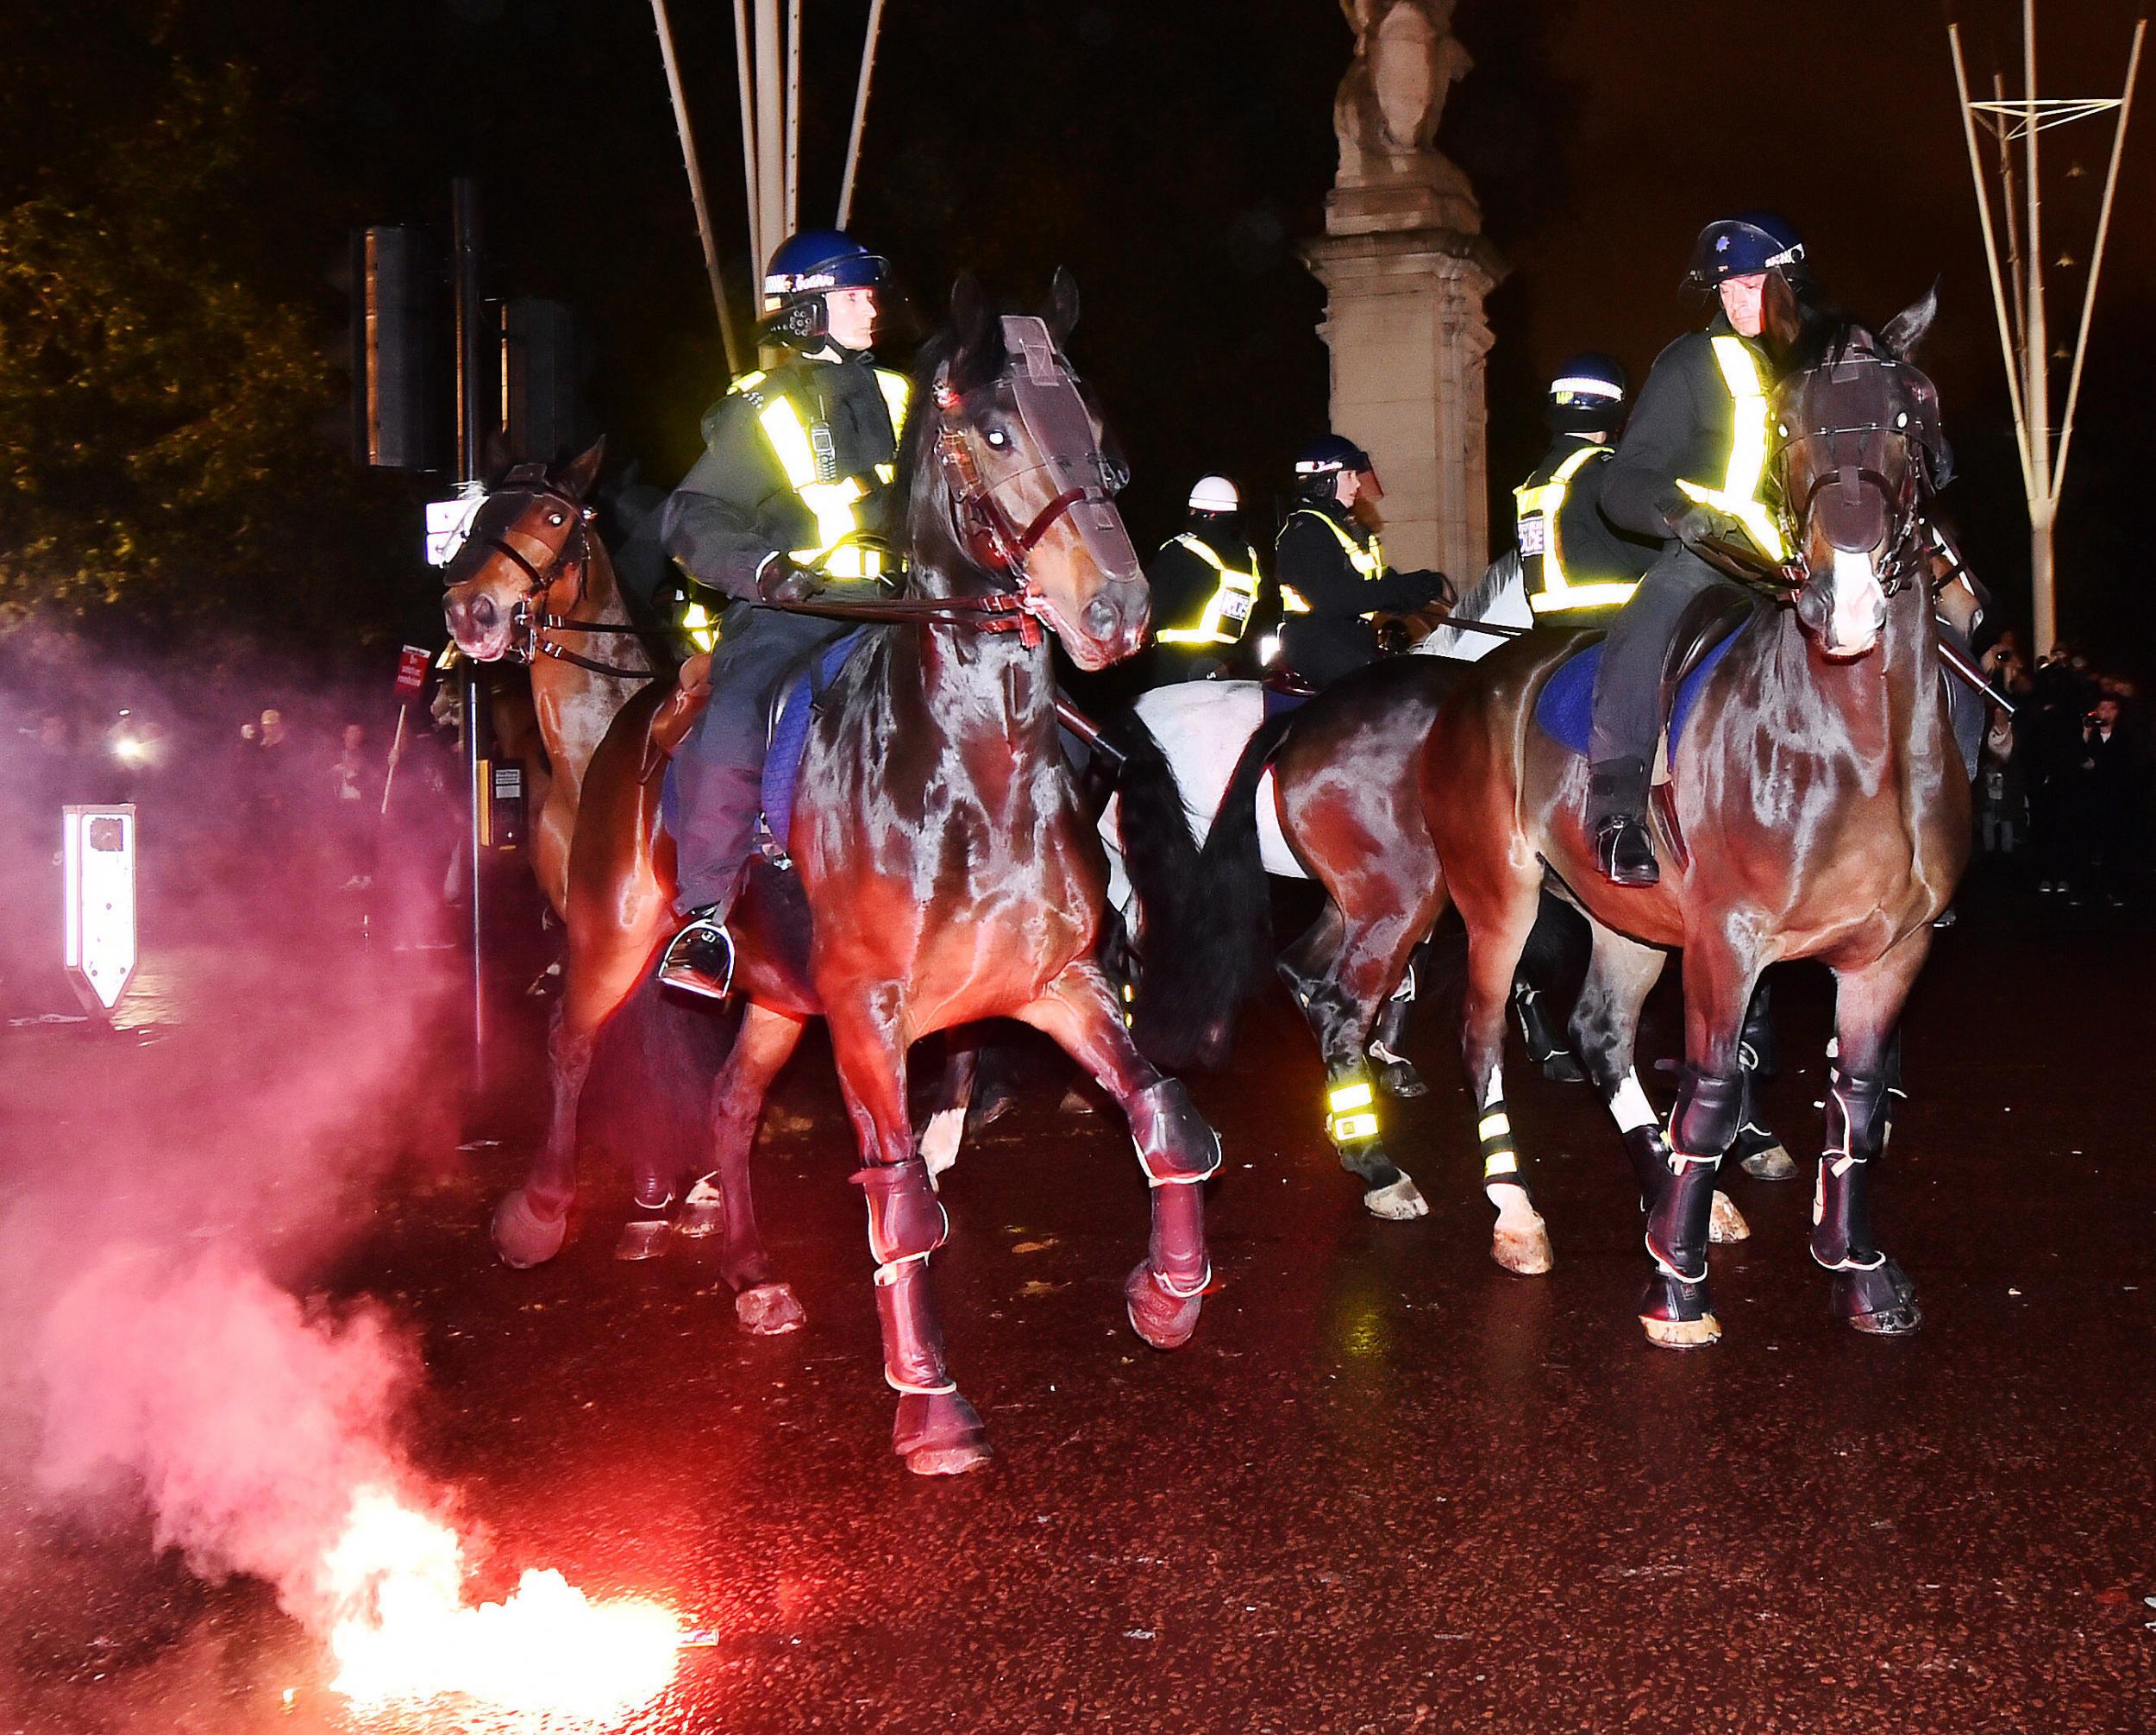 A horse was injured by a firework at the protest